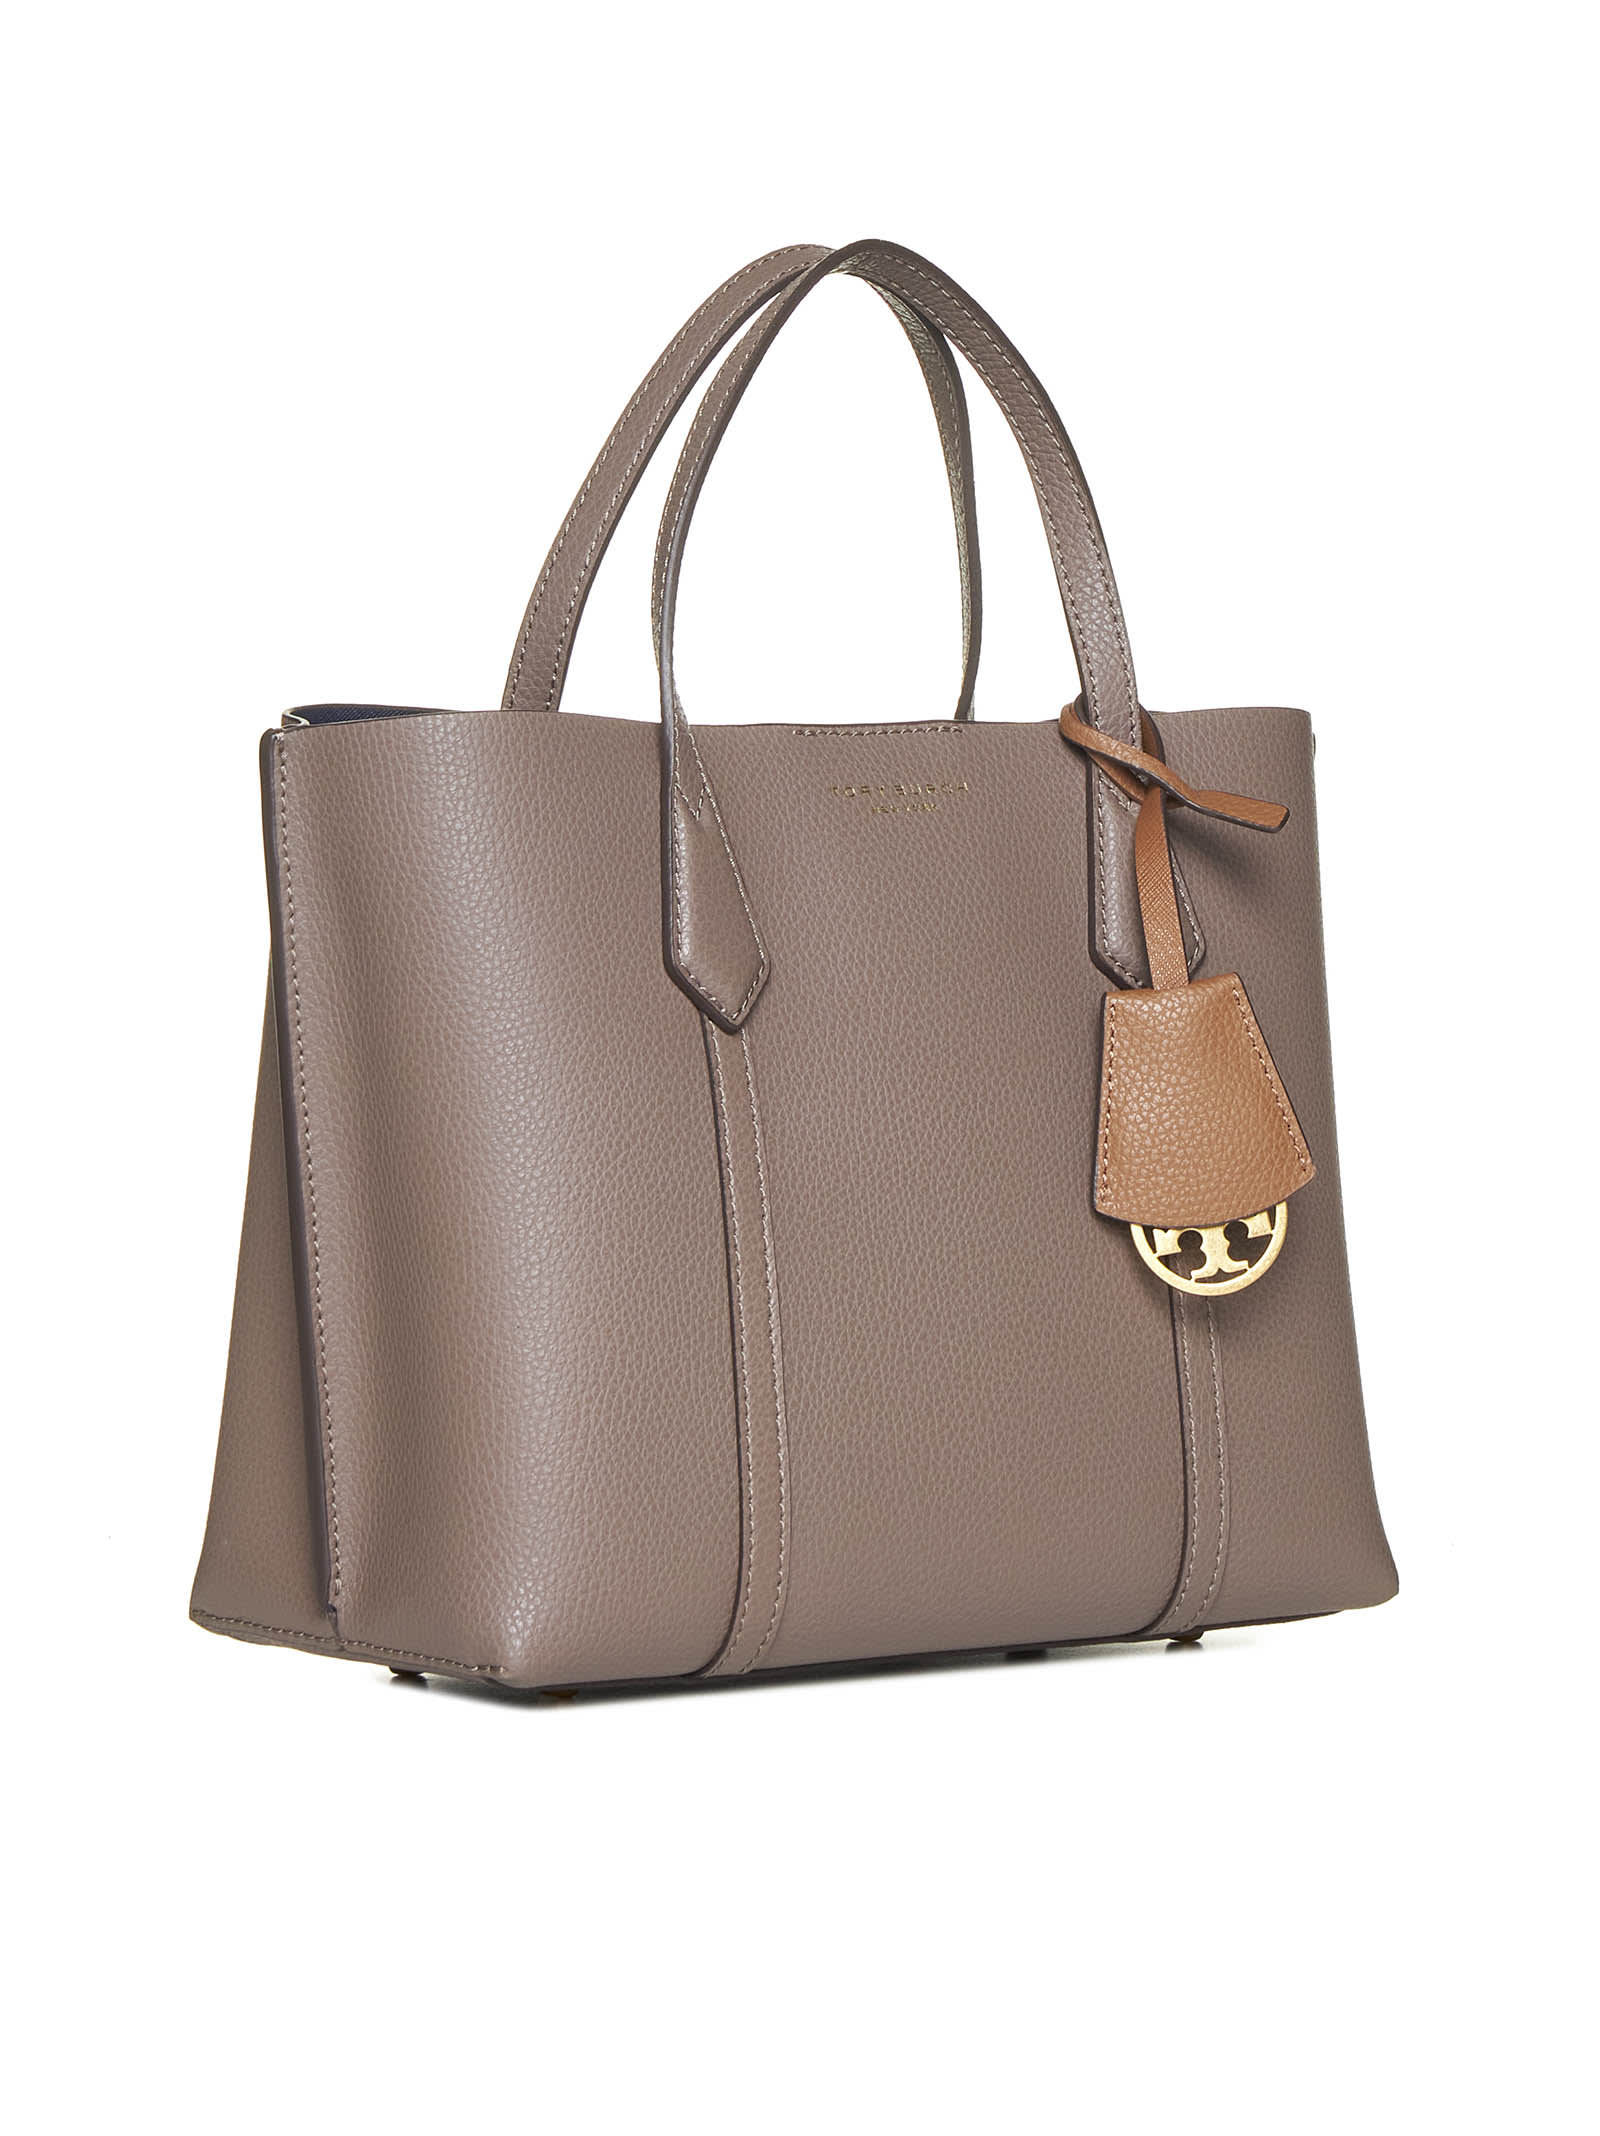 Shop Tory Burch Tote In Clam Shell